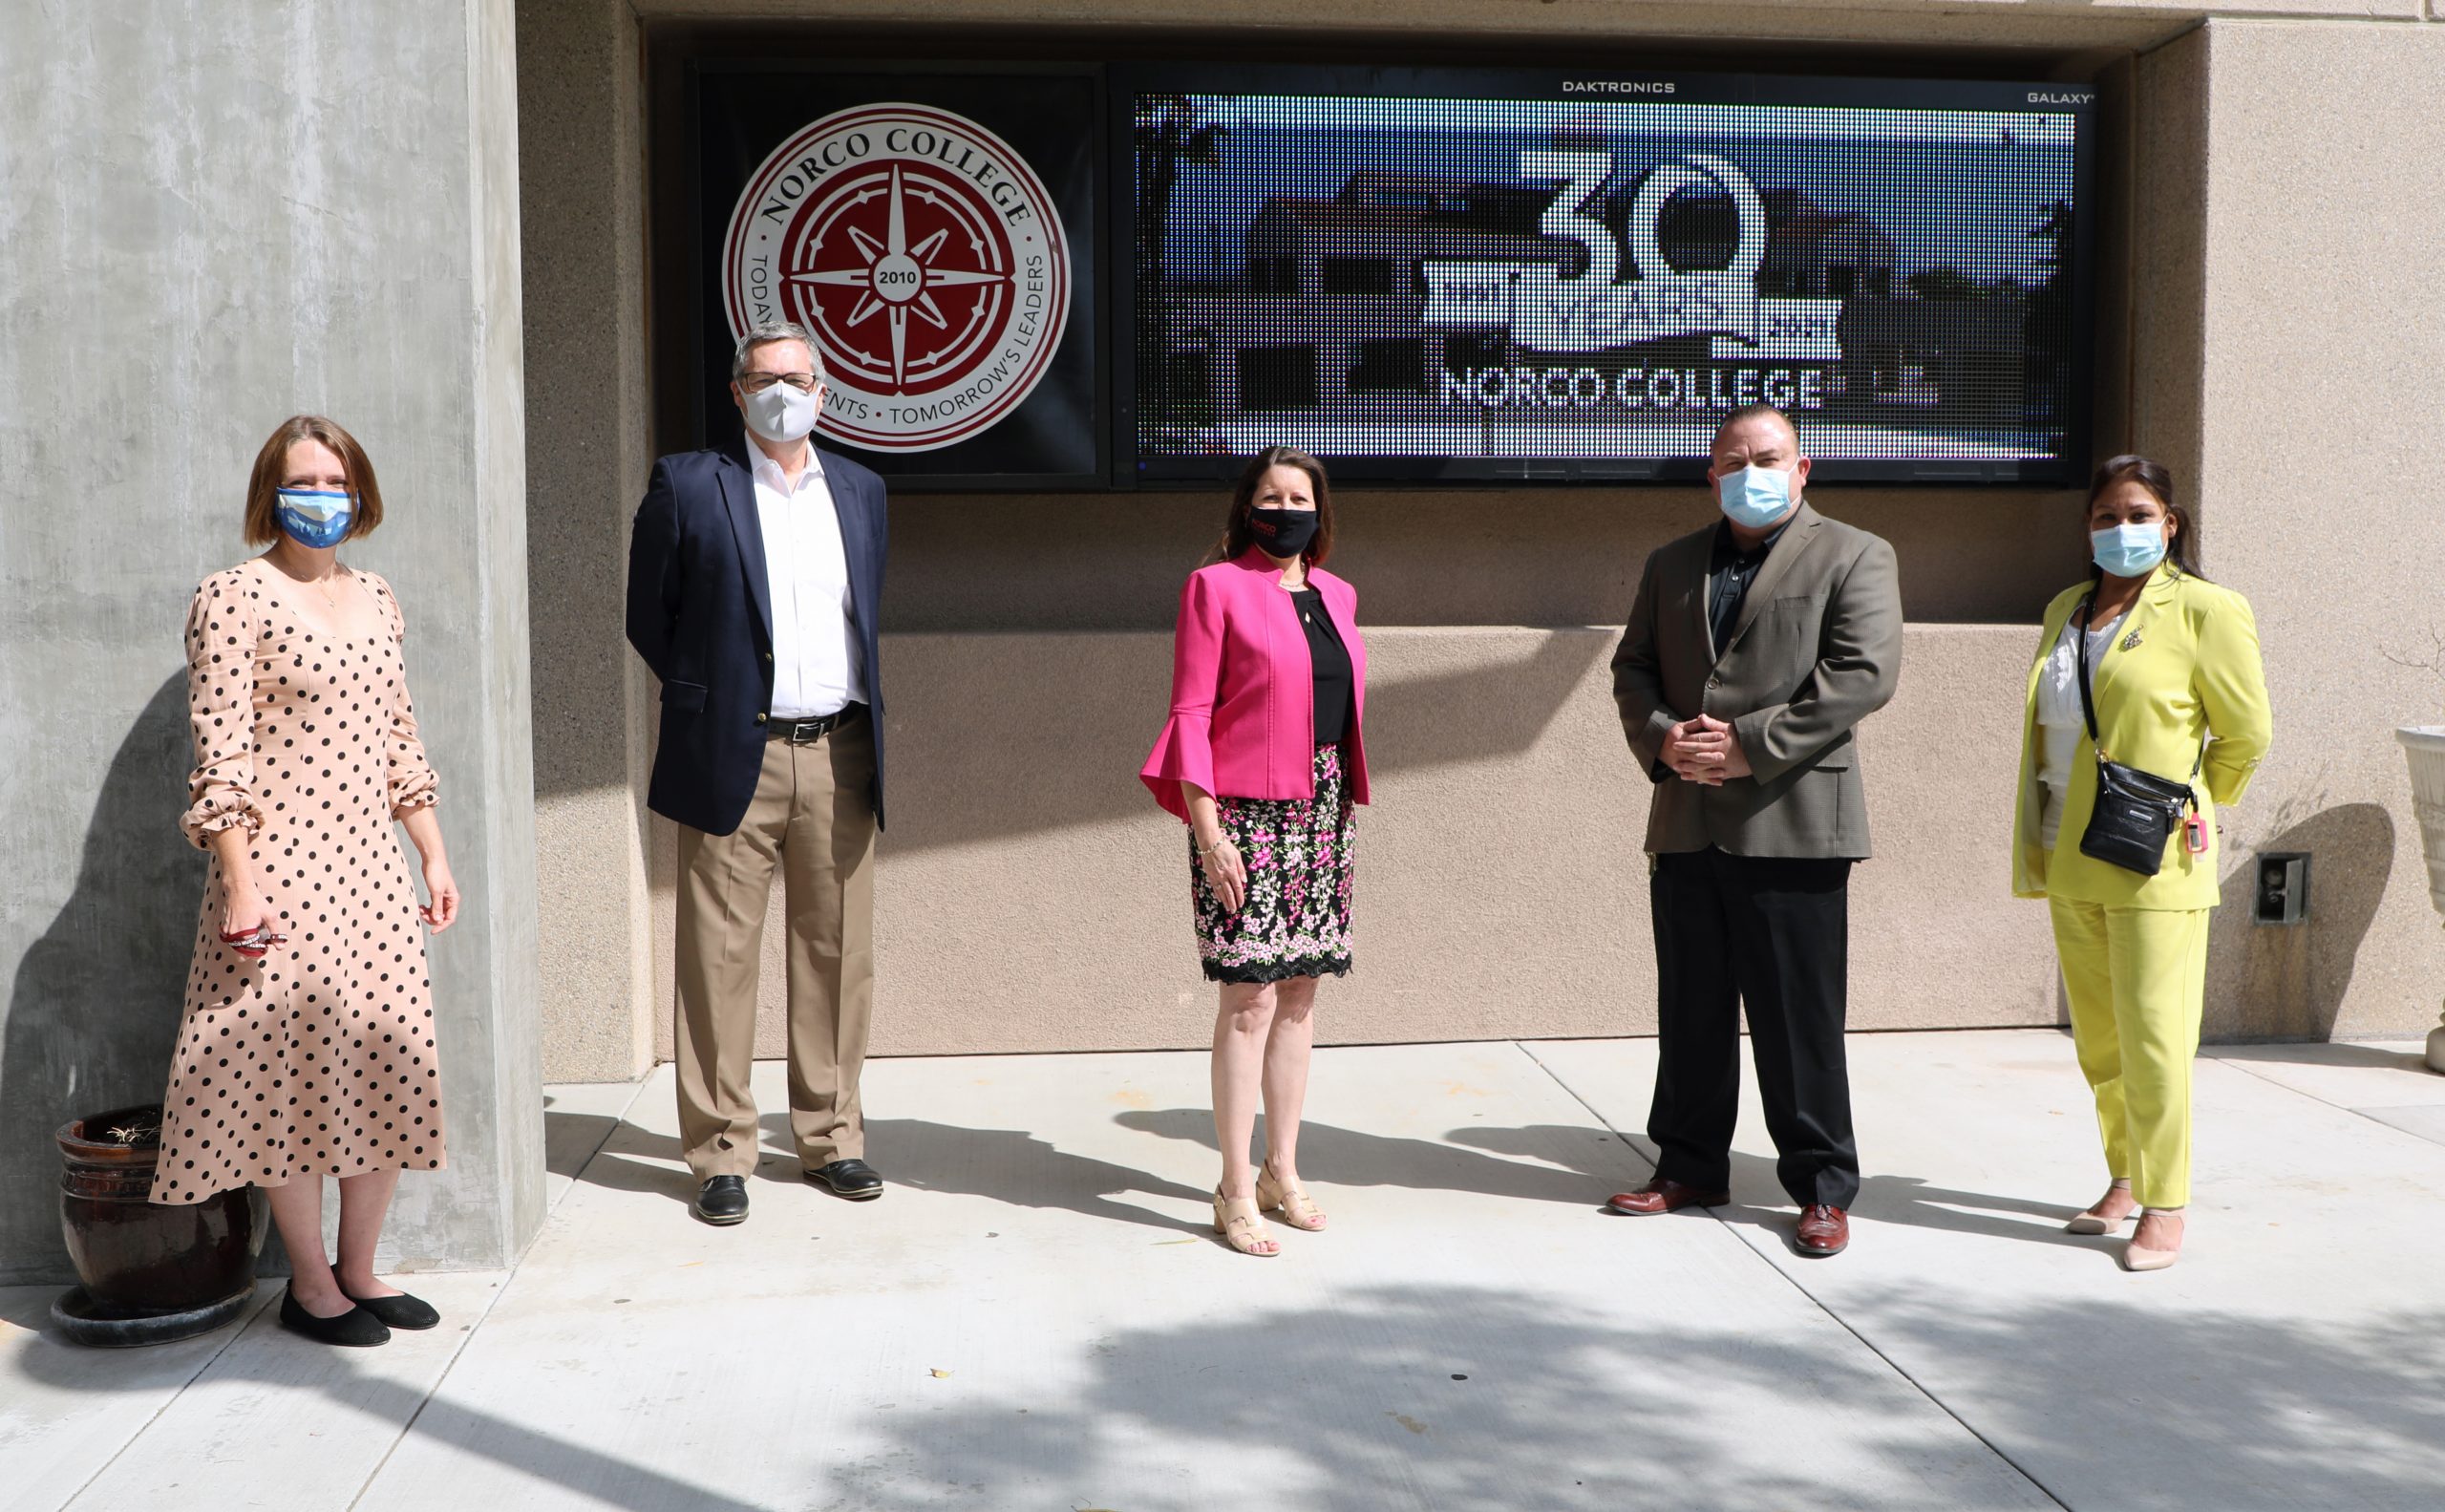 Five people stand in front of a Norco College building.